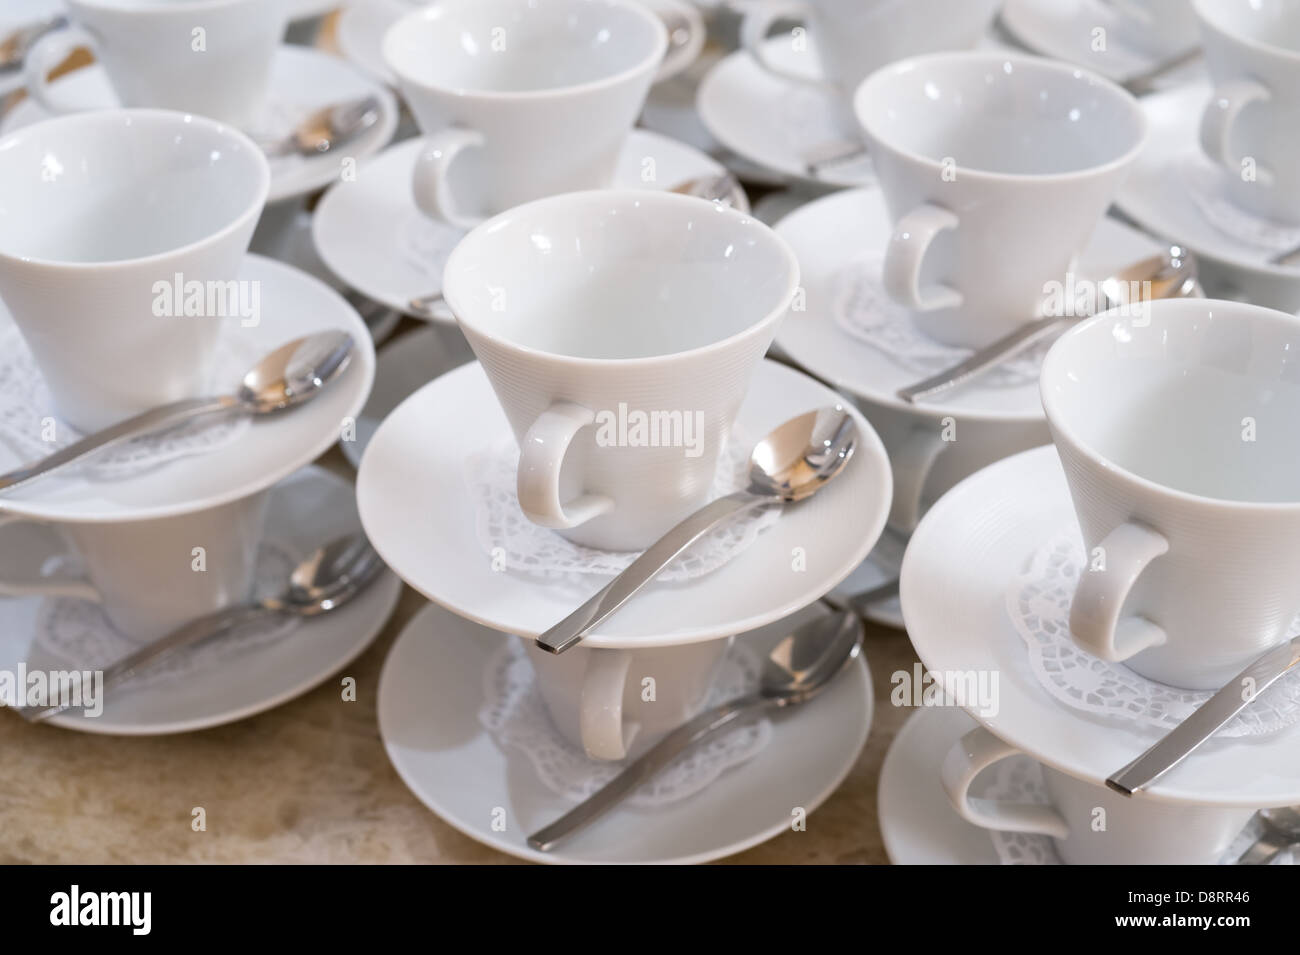 cups on saucers with teaspoons Stock Photo